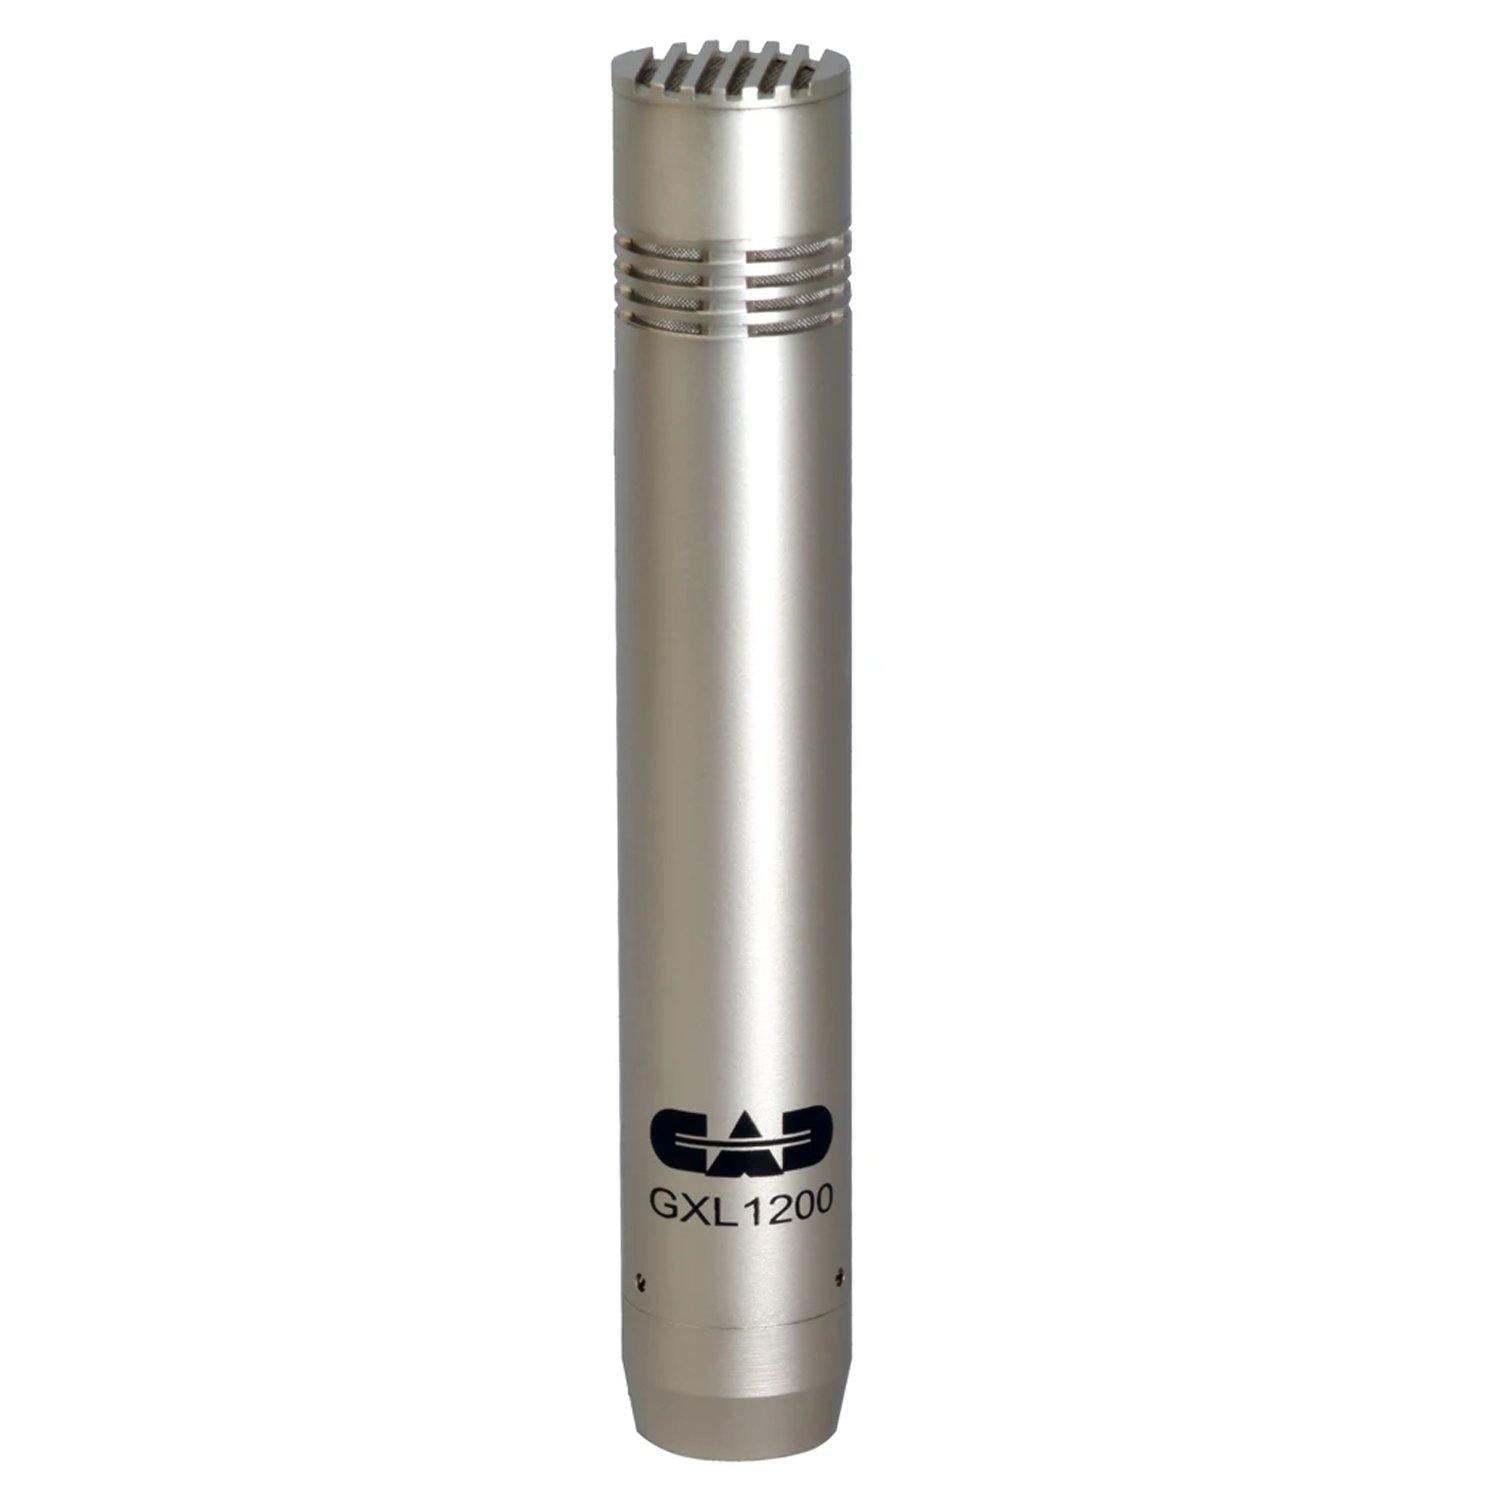 CAD GXL 1200 Small Diaphragm Condenser Microphone - DY Pro Audio